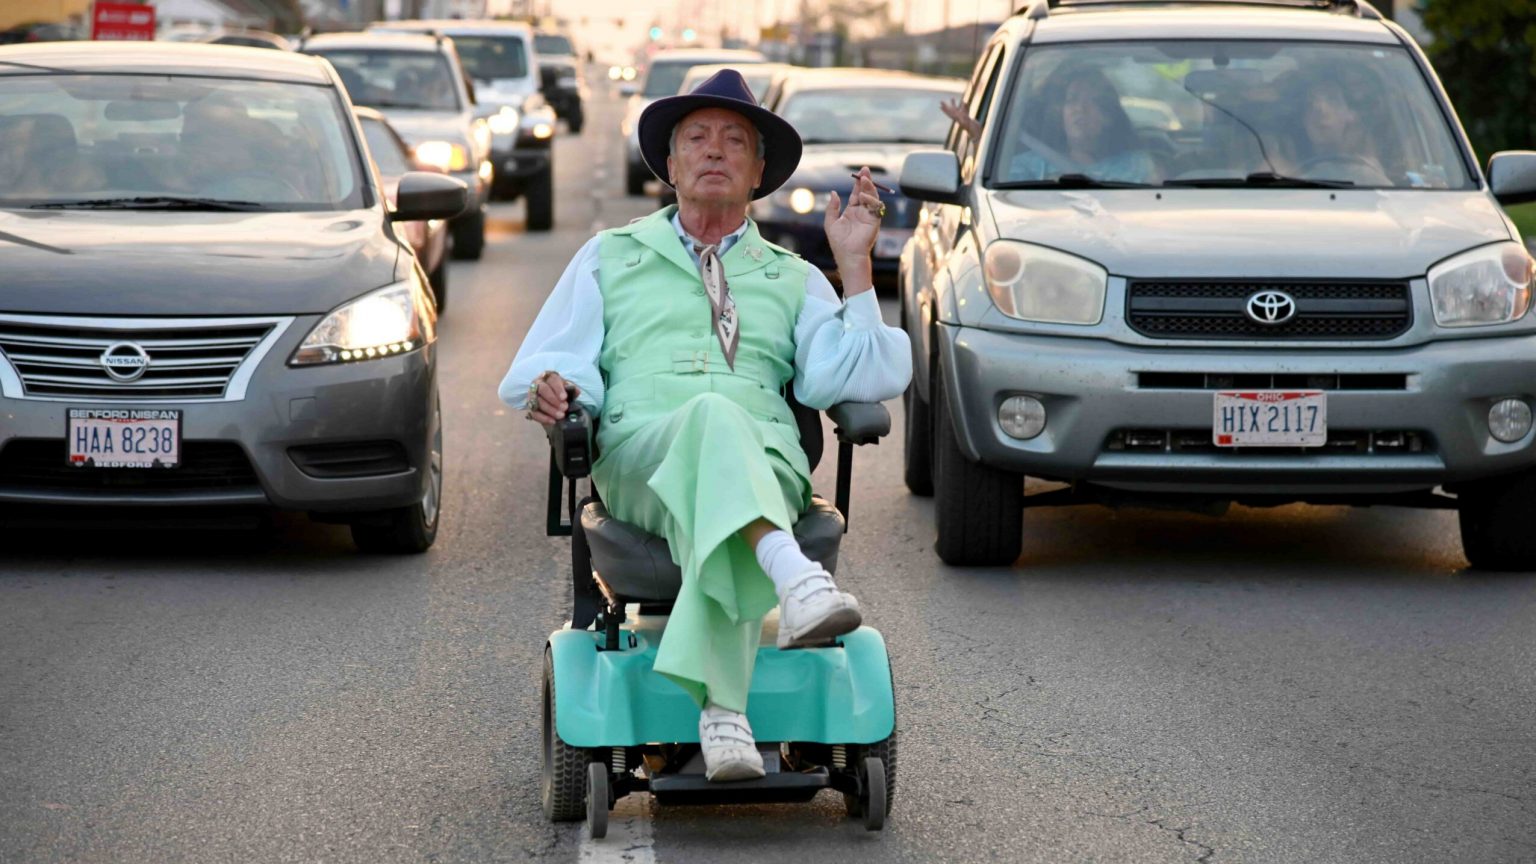 Udo Kier wearing a colorful suit while driving a wheel chair as seen in the SXSW film Swan Song.